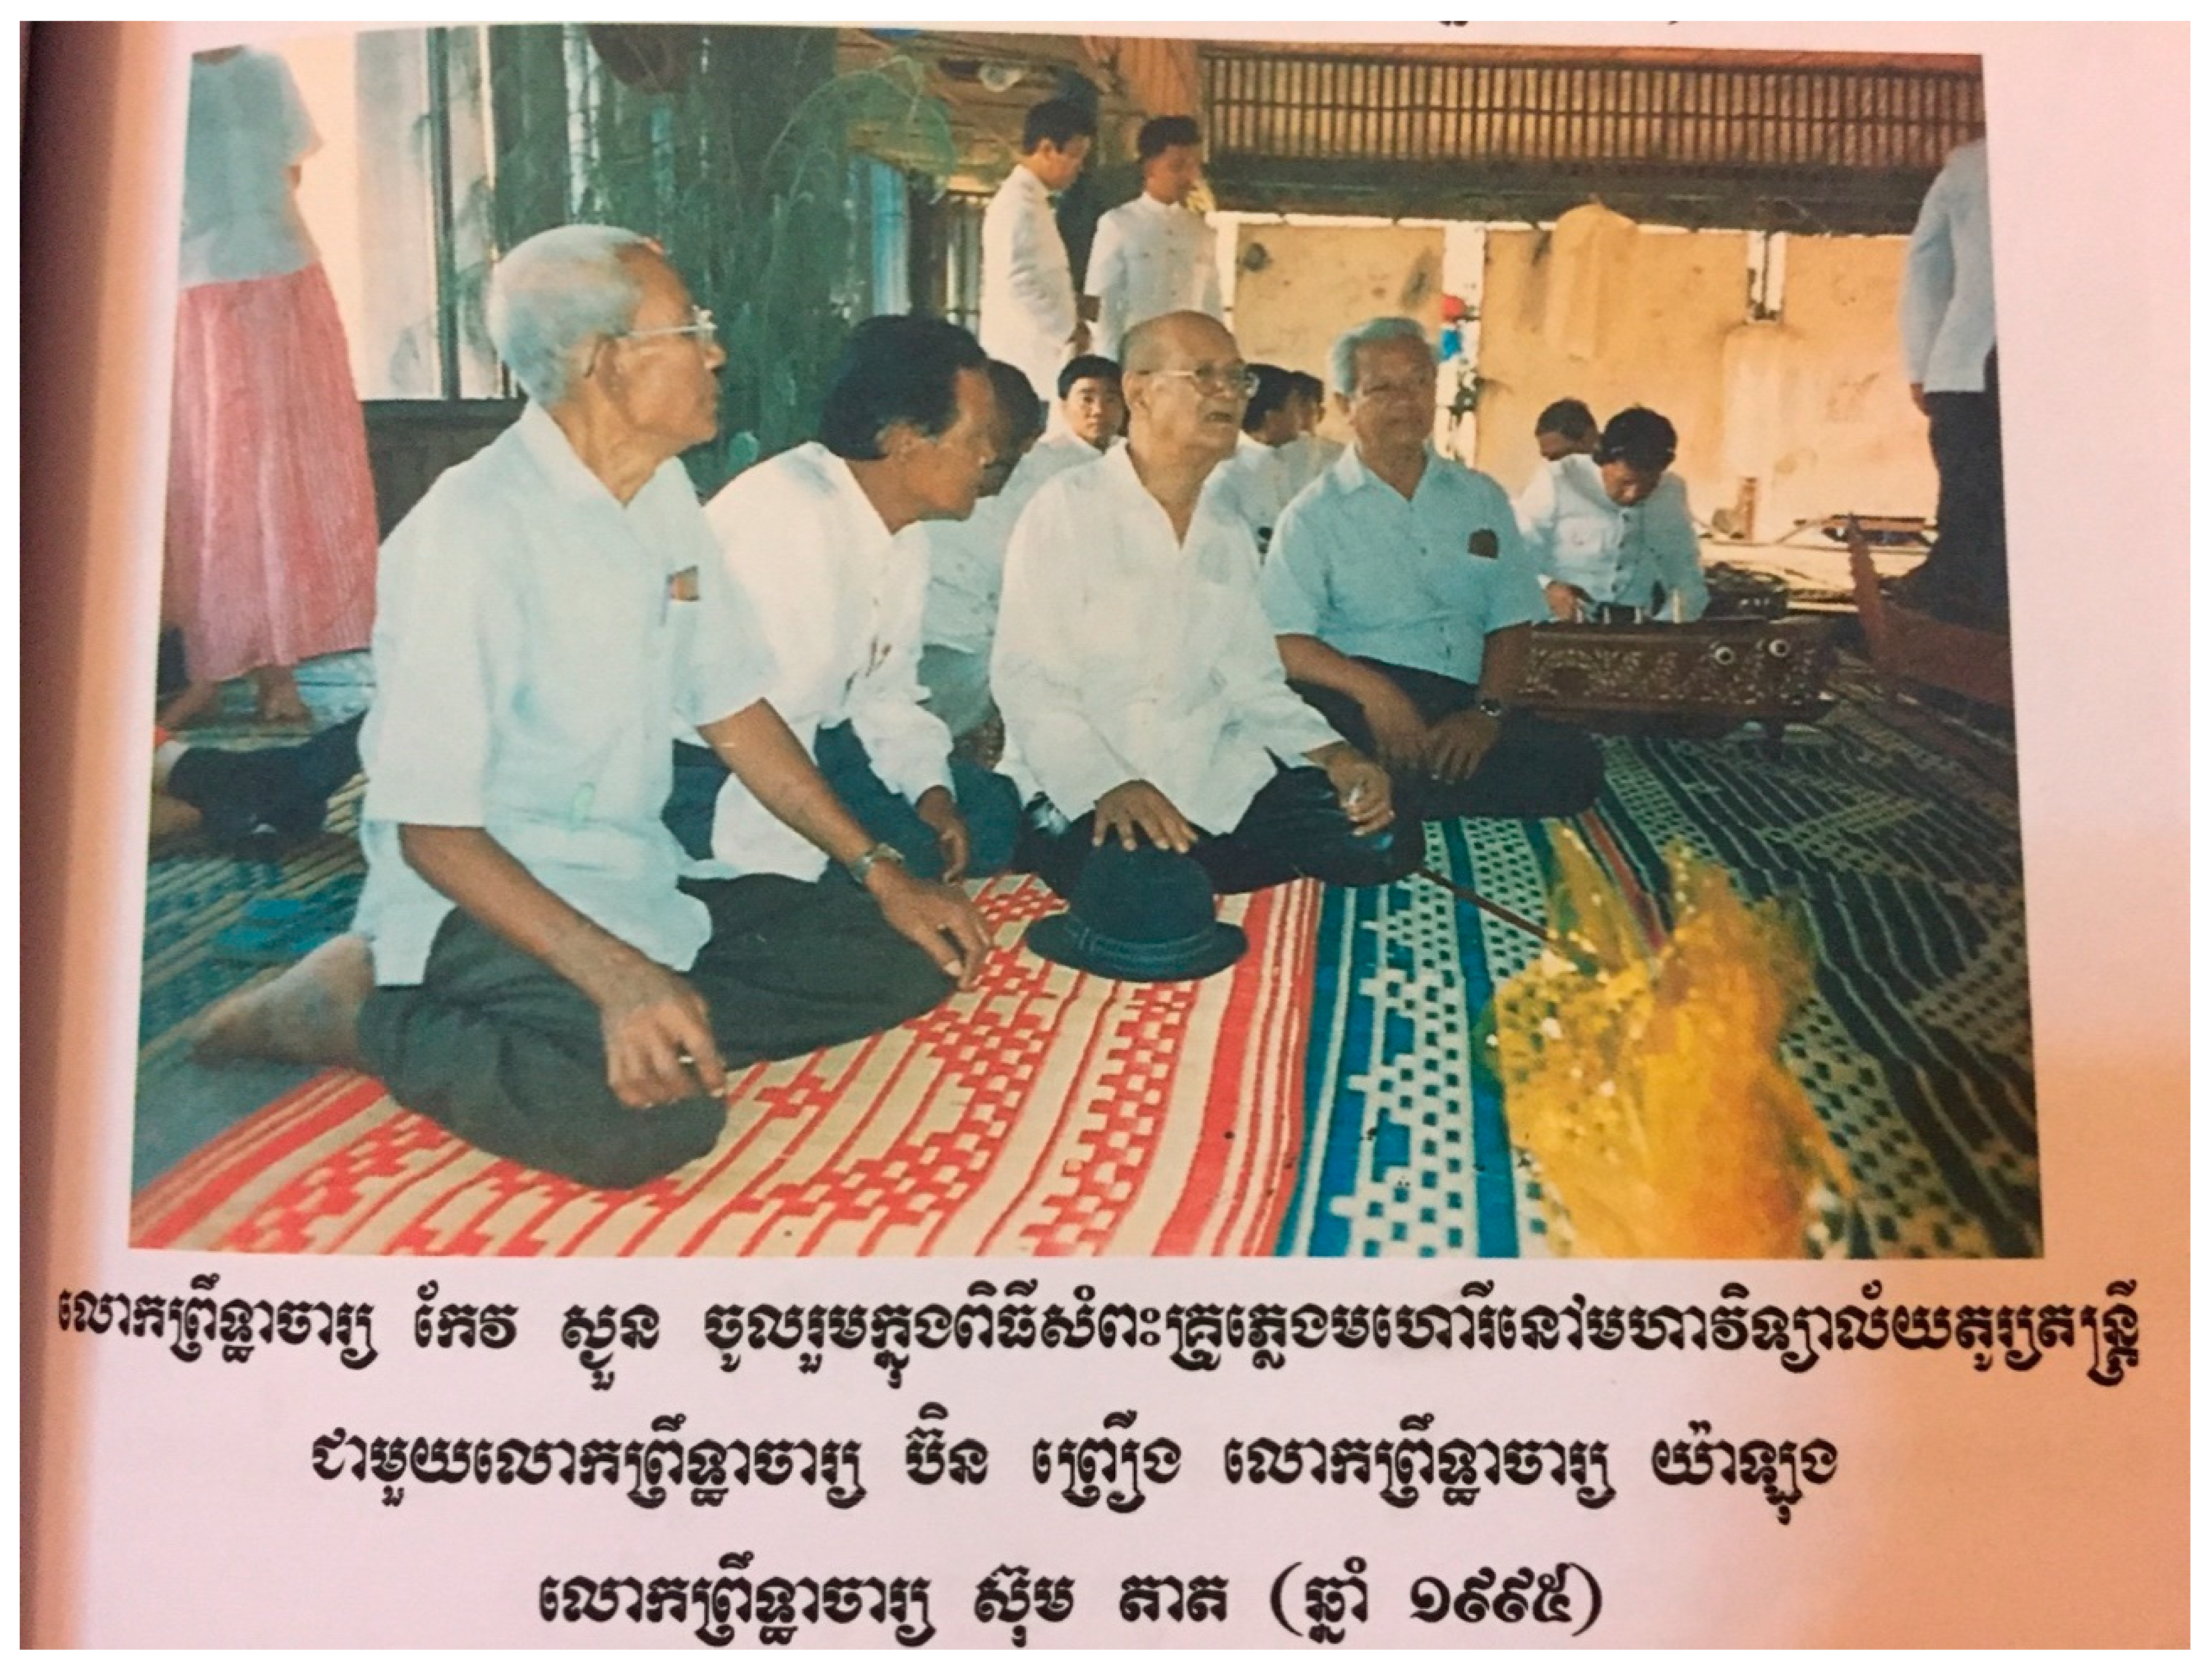 Religions Free Full-Text Popular Songs, Melodies from the Dead Moving beyond Historicism with the Buddhist Ethics and Aesthetics of Pin Peat and Cambodian Hip pic picture